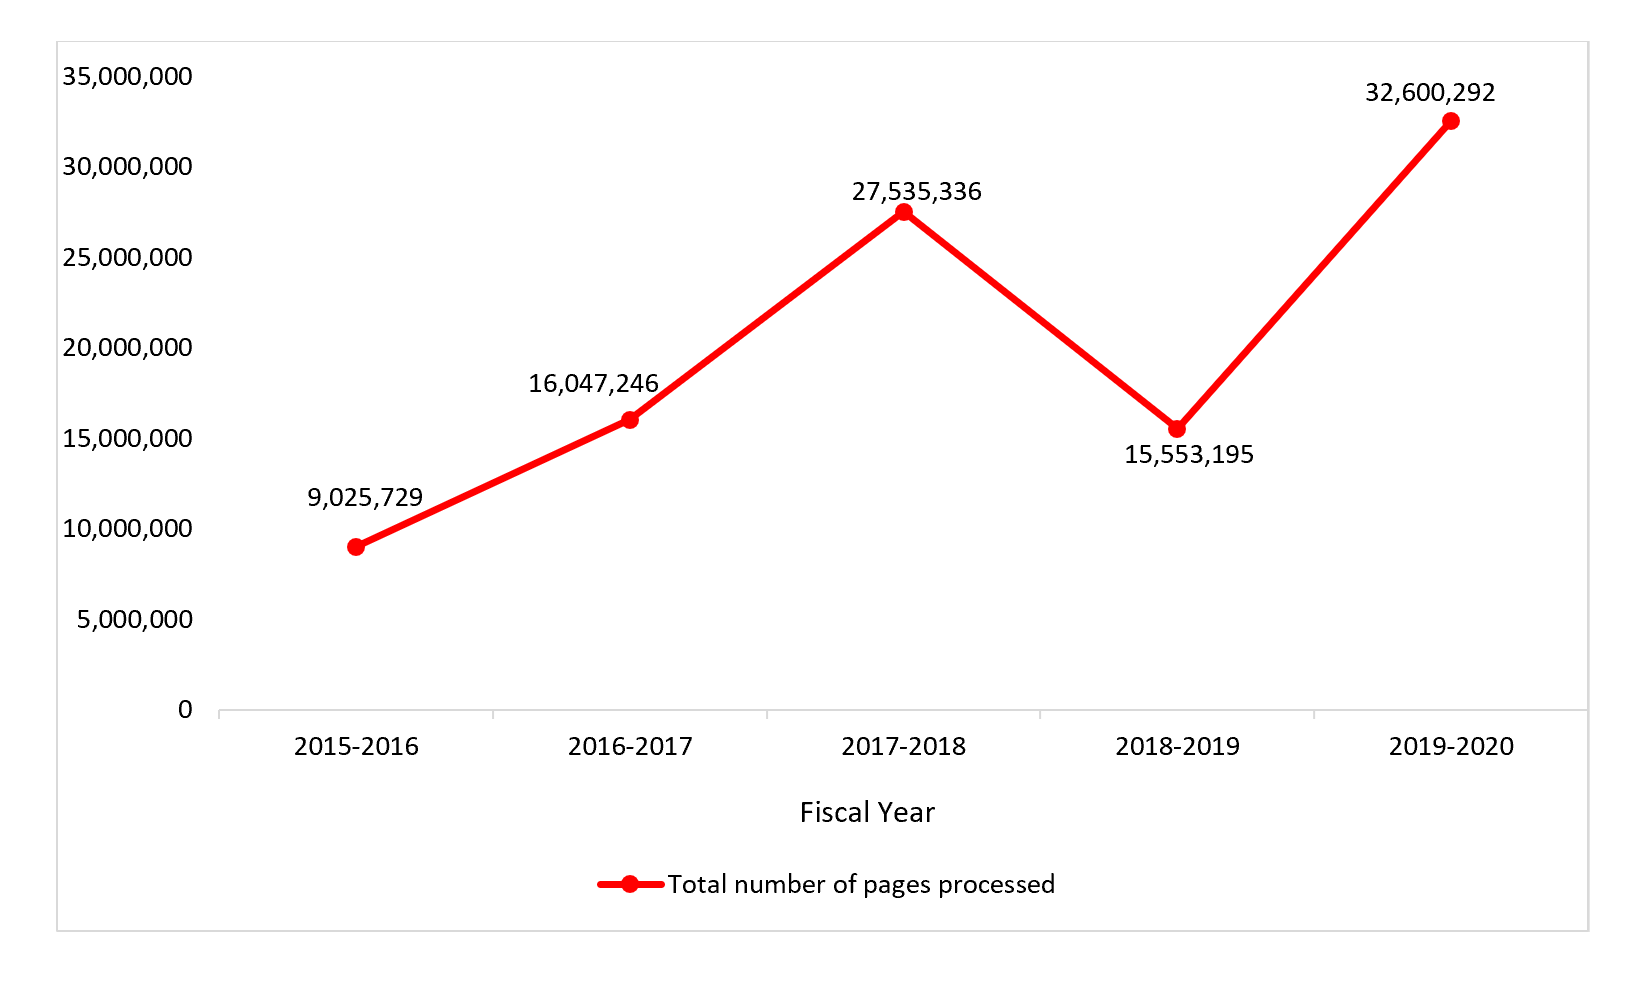 number of pages processed in response to closed ATI requests, from fiscal year 2015 to 2016 to fiscal year 2019 to 2020. Text version below: